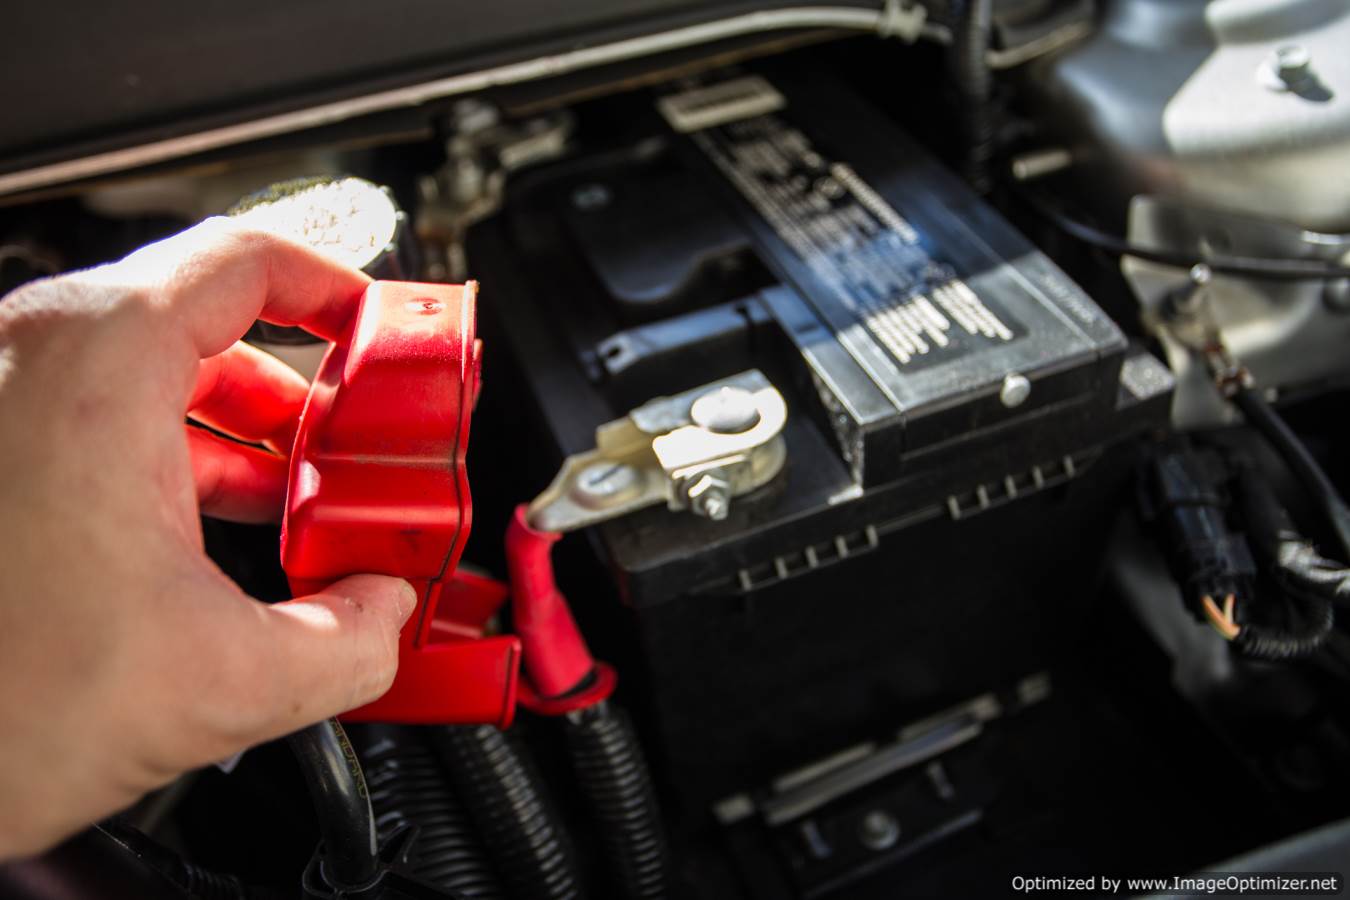 Car batteries last 3 to 5 | to get the most from your car battery | AAA Automotive